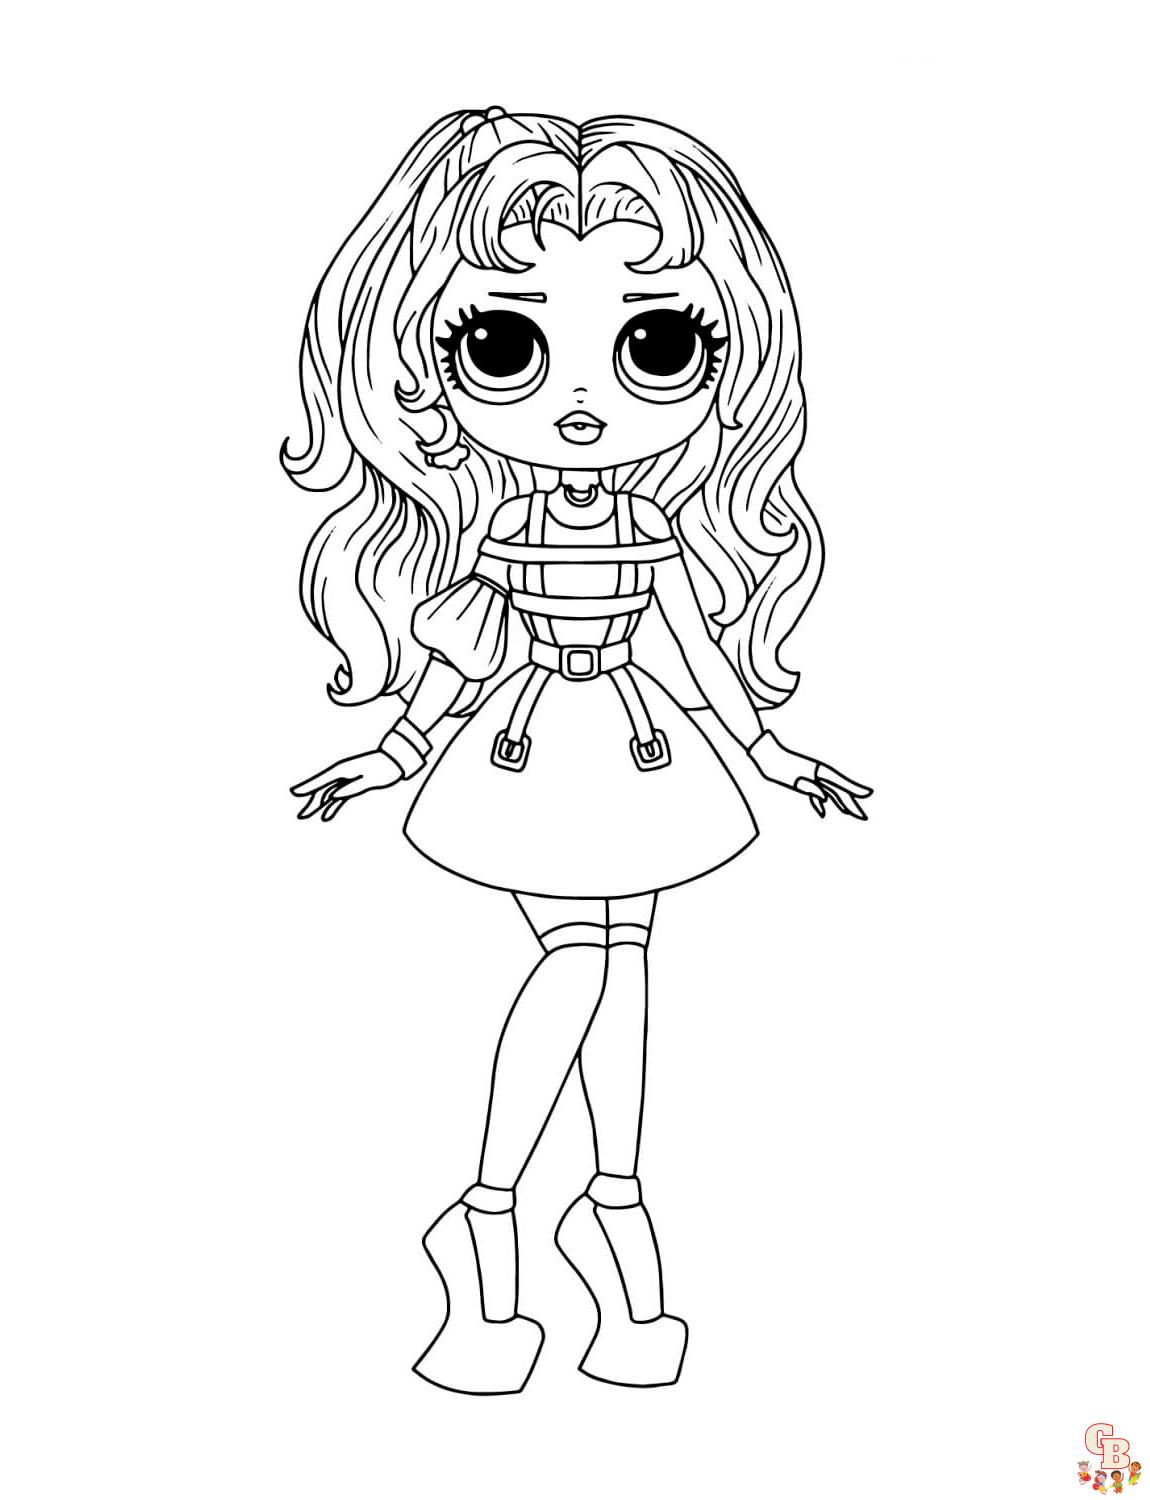 omg fashion lol omg doll coloring pages 9